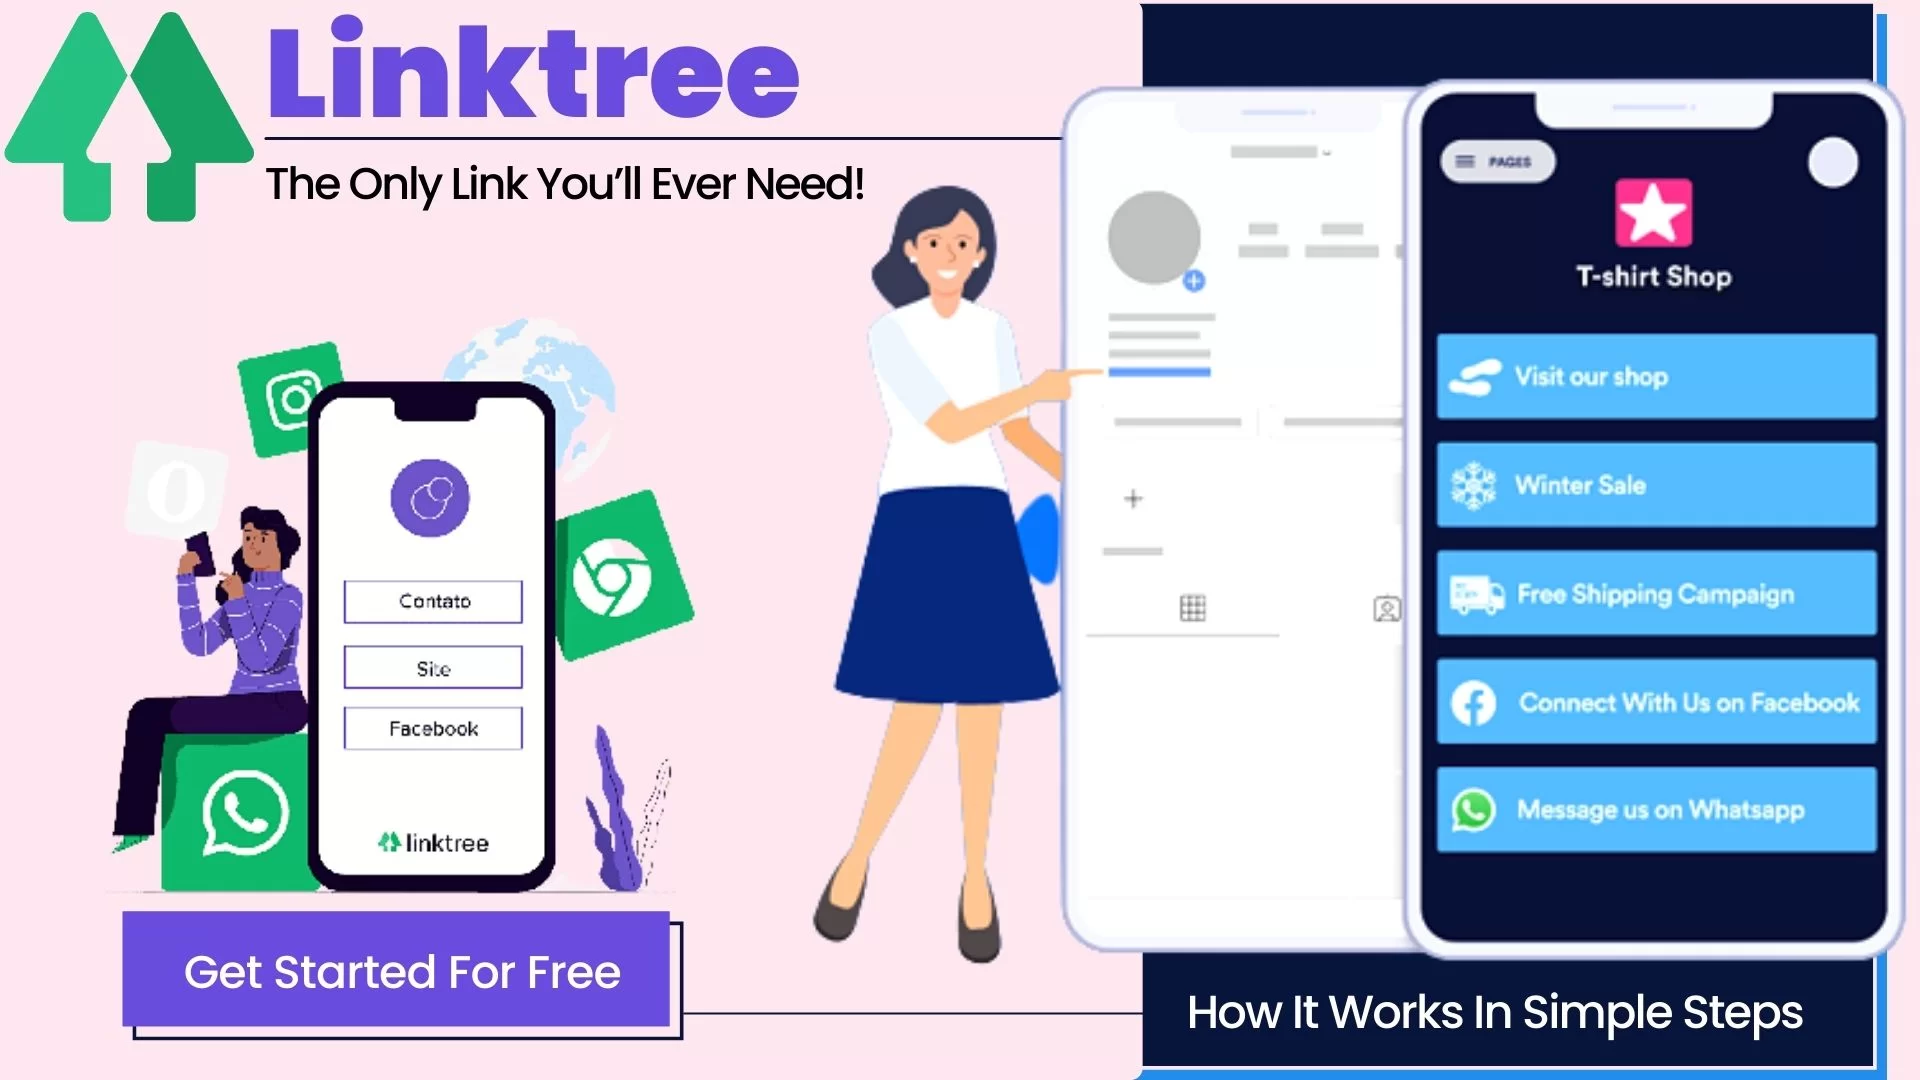 What Is Linktree?